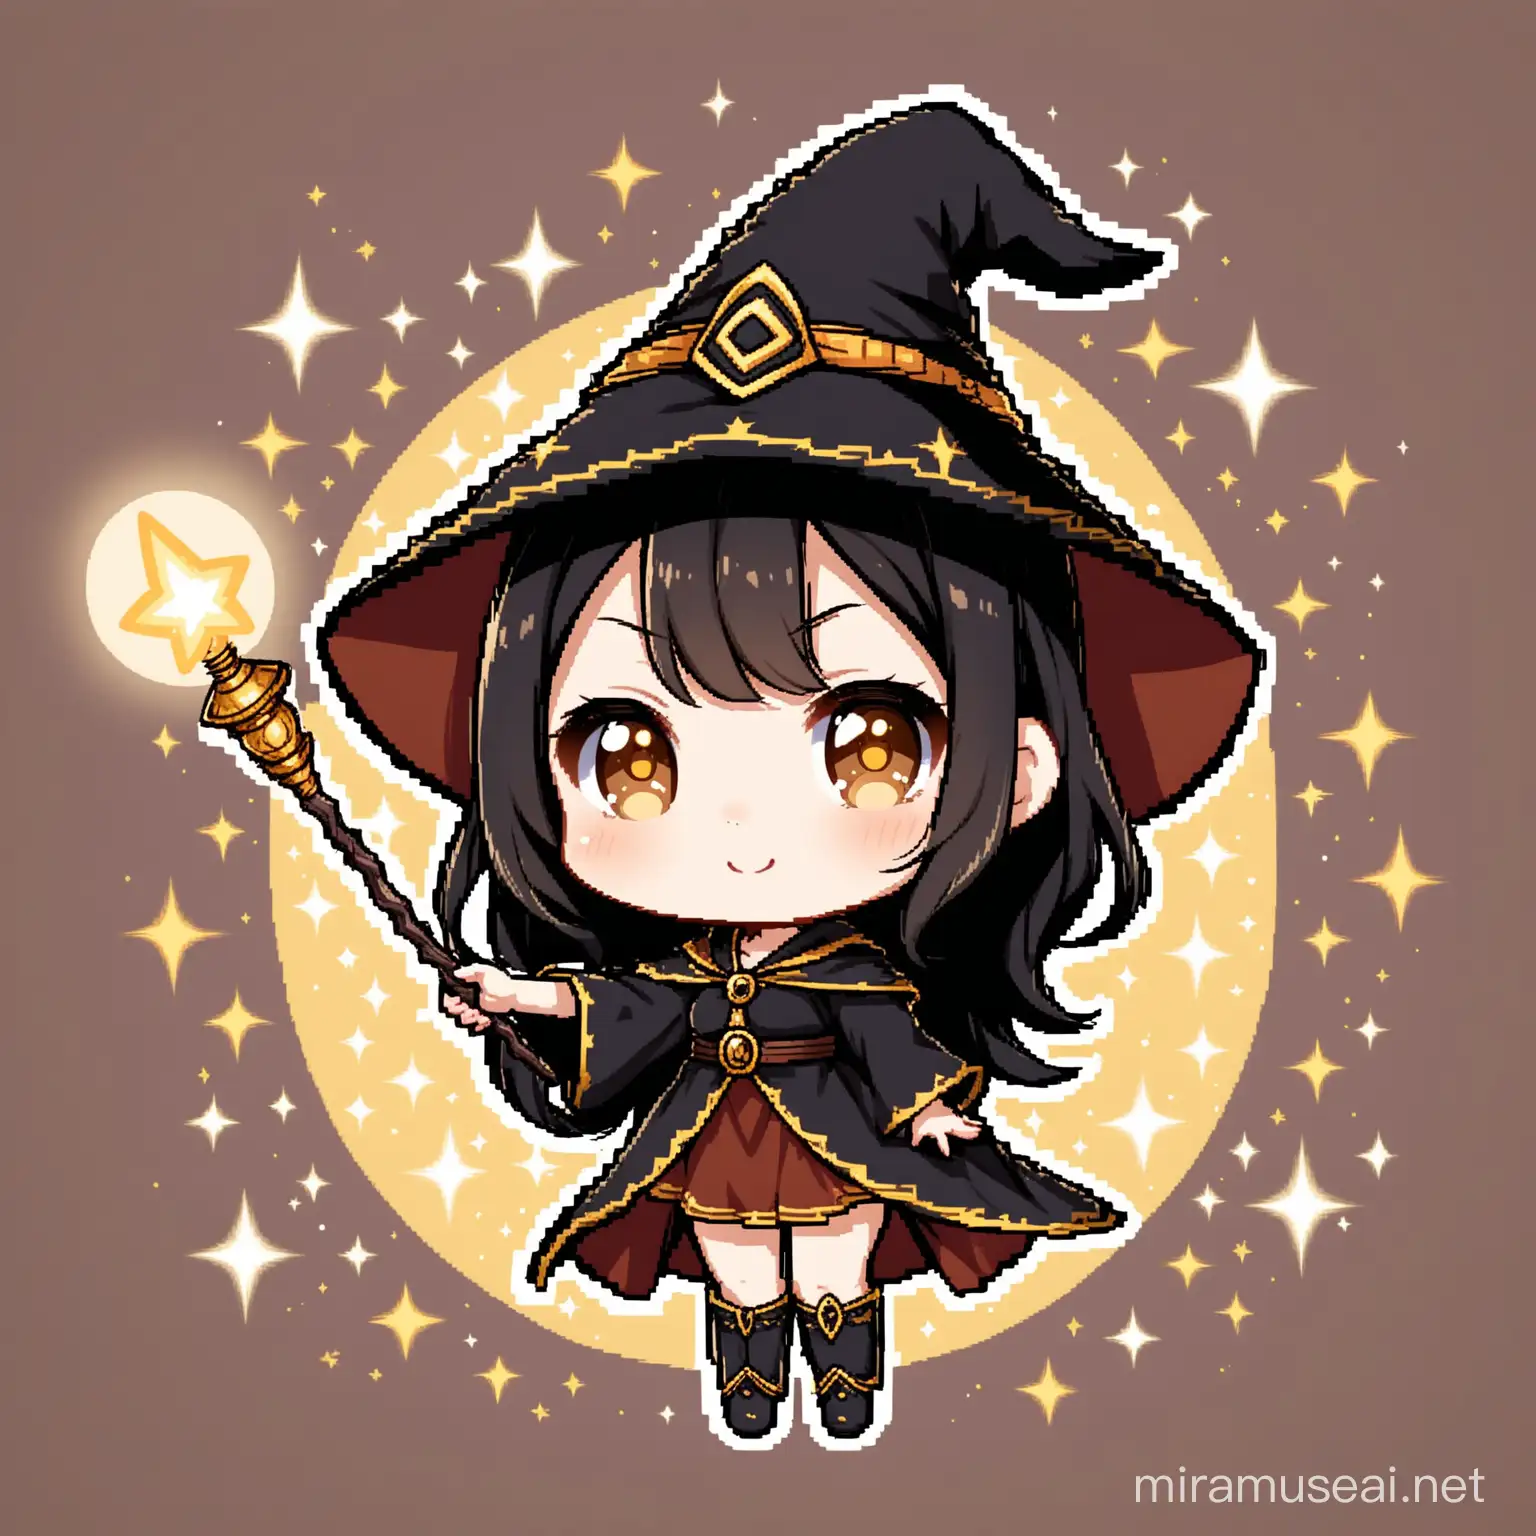 female child sorceress with brown eyes and black hair  waving a wand chibi style